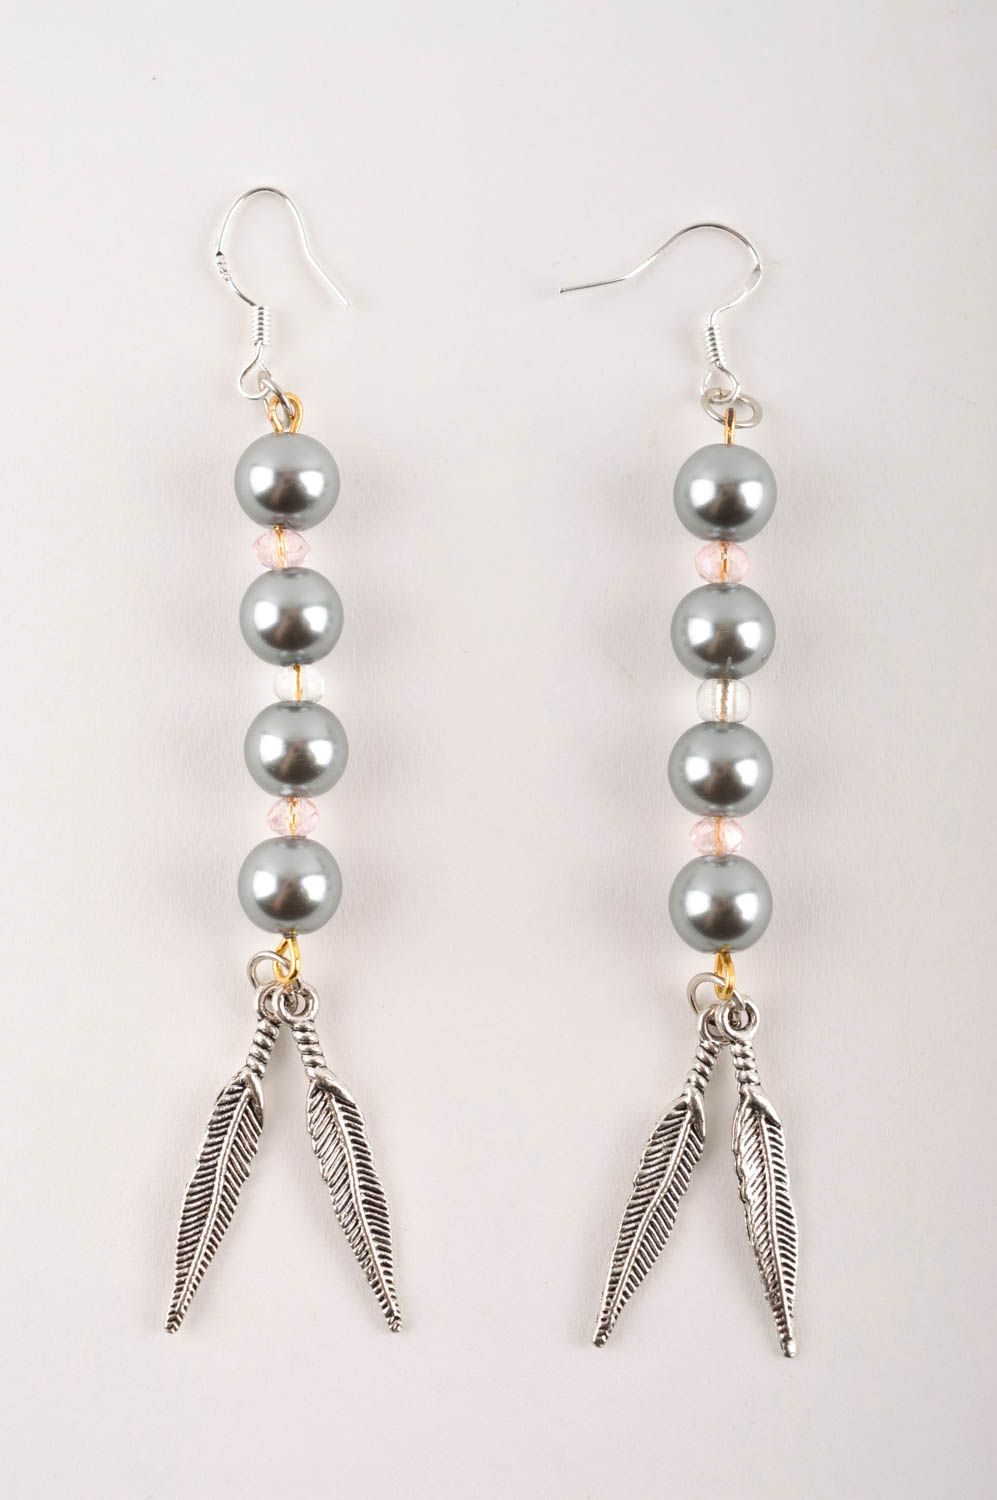 Handmade earrings with artificial pearls stylish accessories fashion jewelry photo 3